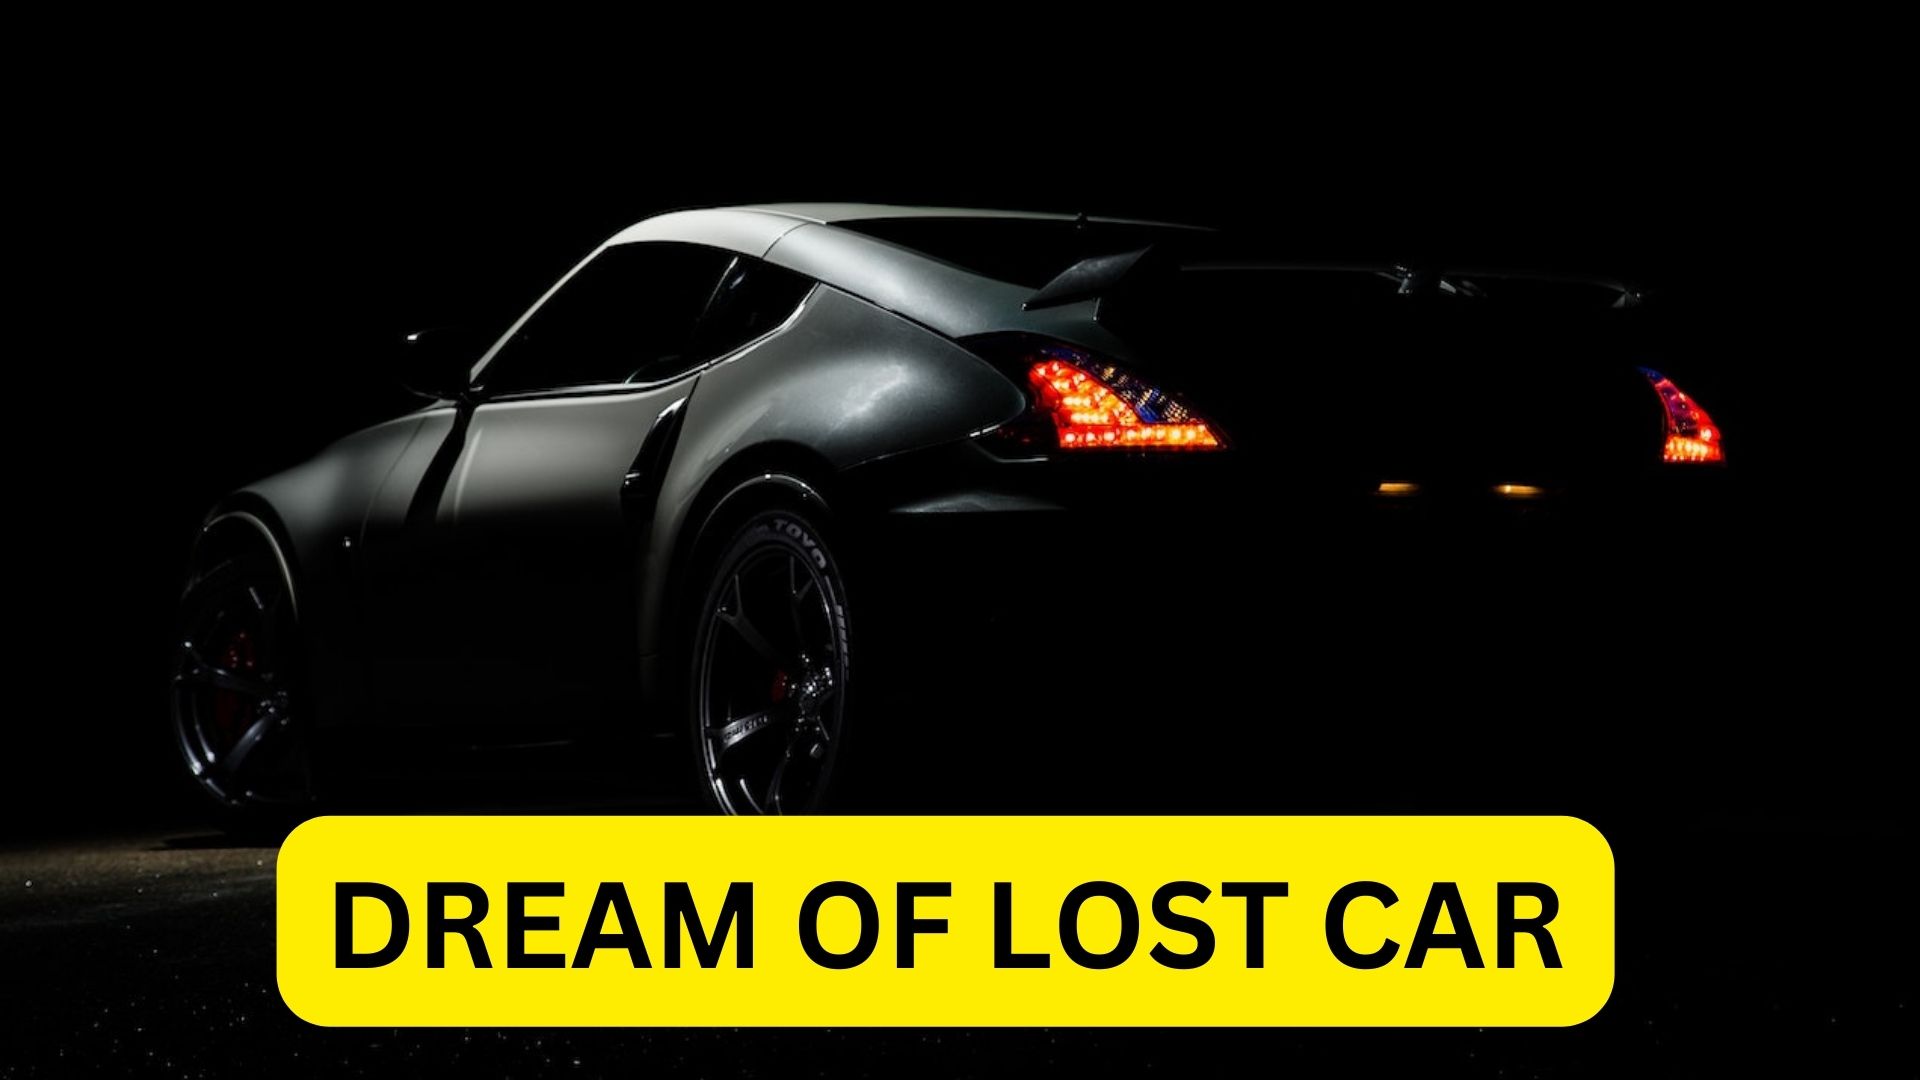 Dream Of Lost Car - Associated With Uncertainty Or Demotivation